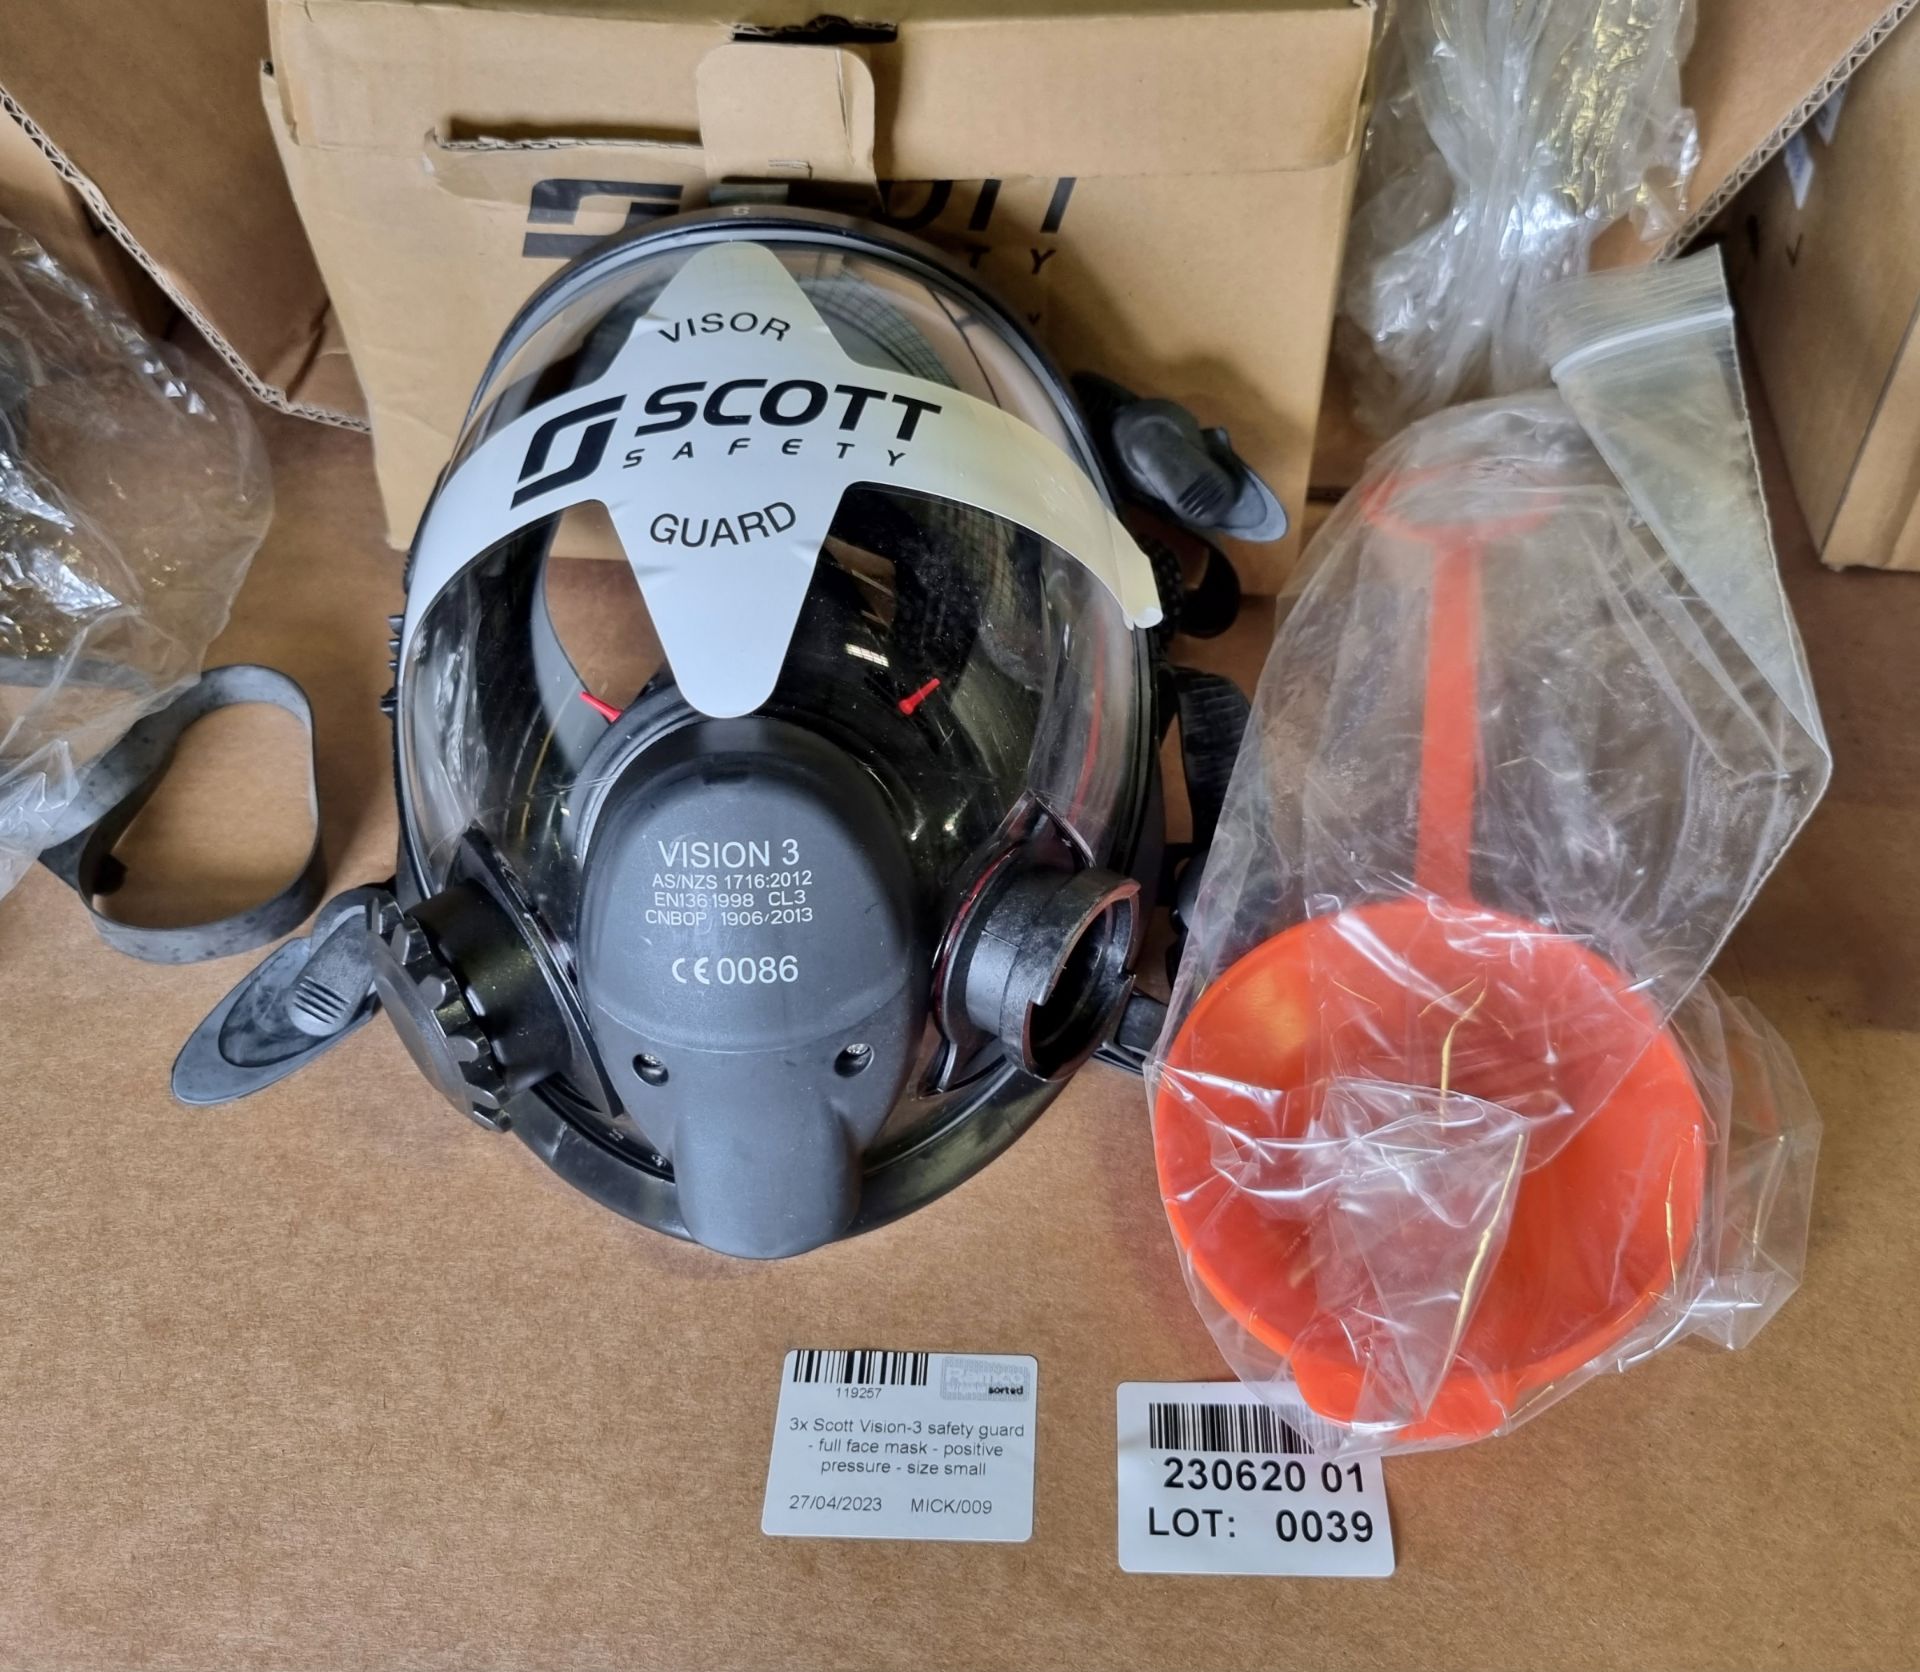 3x Scott Vision-3 safety guard - full face masks - positive pressure - size small - Image 2 of 3